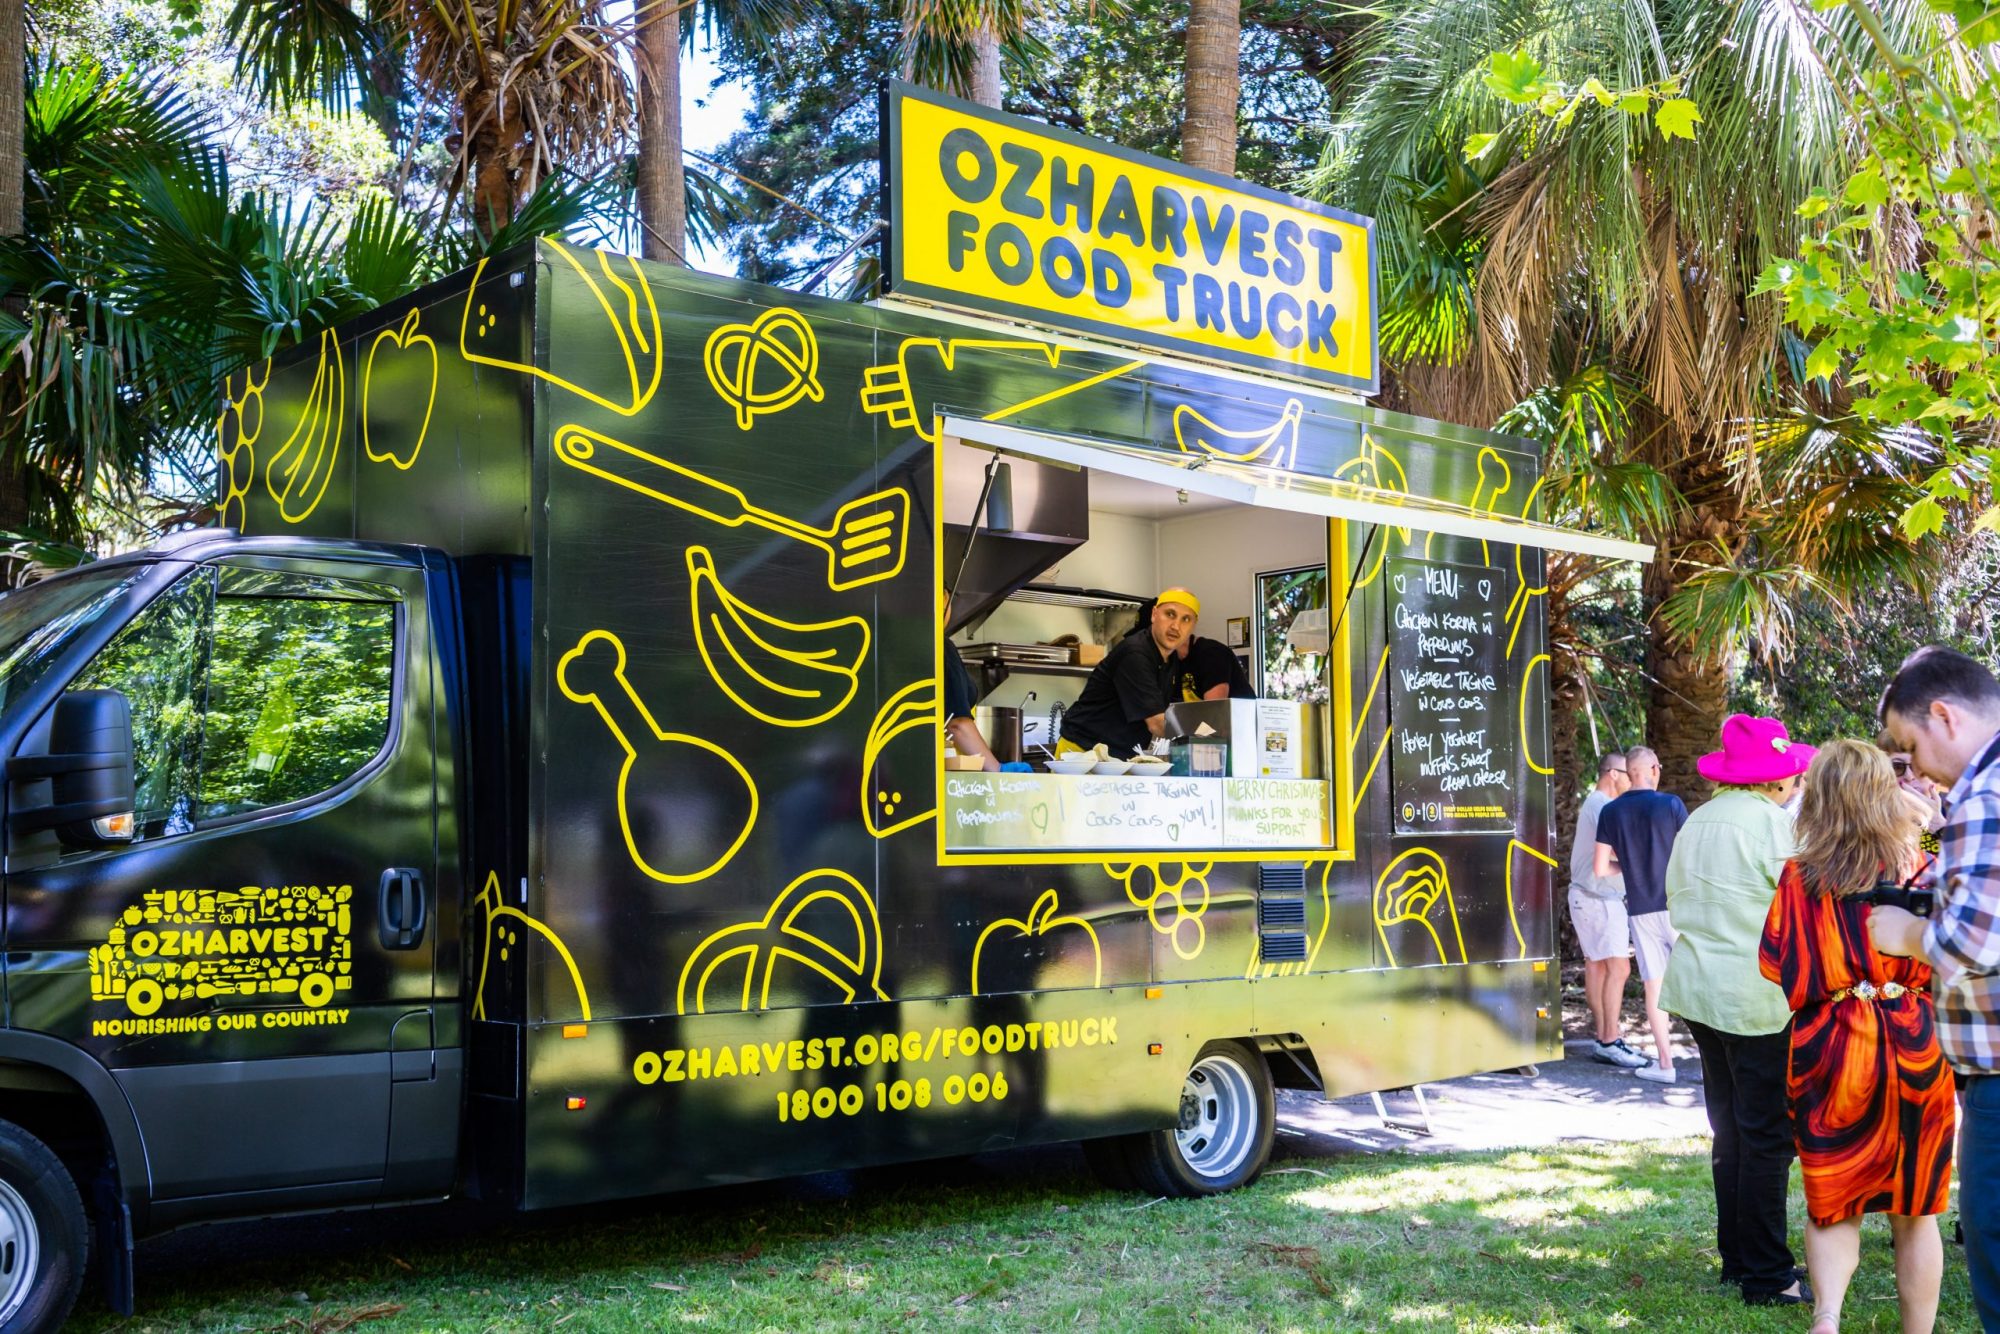 Food-truck_ozharvest-scaled-e1608077645931